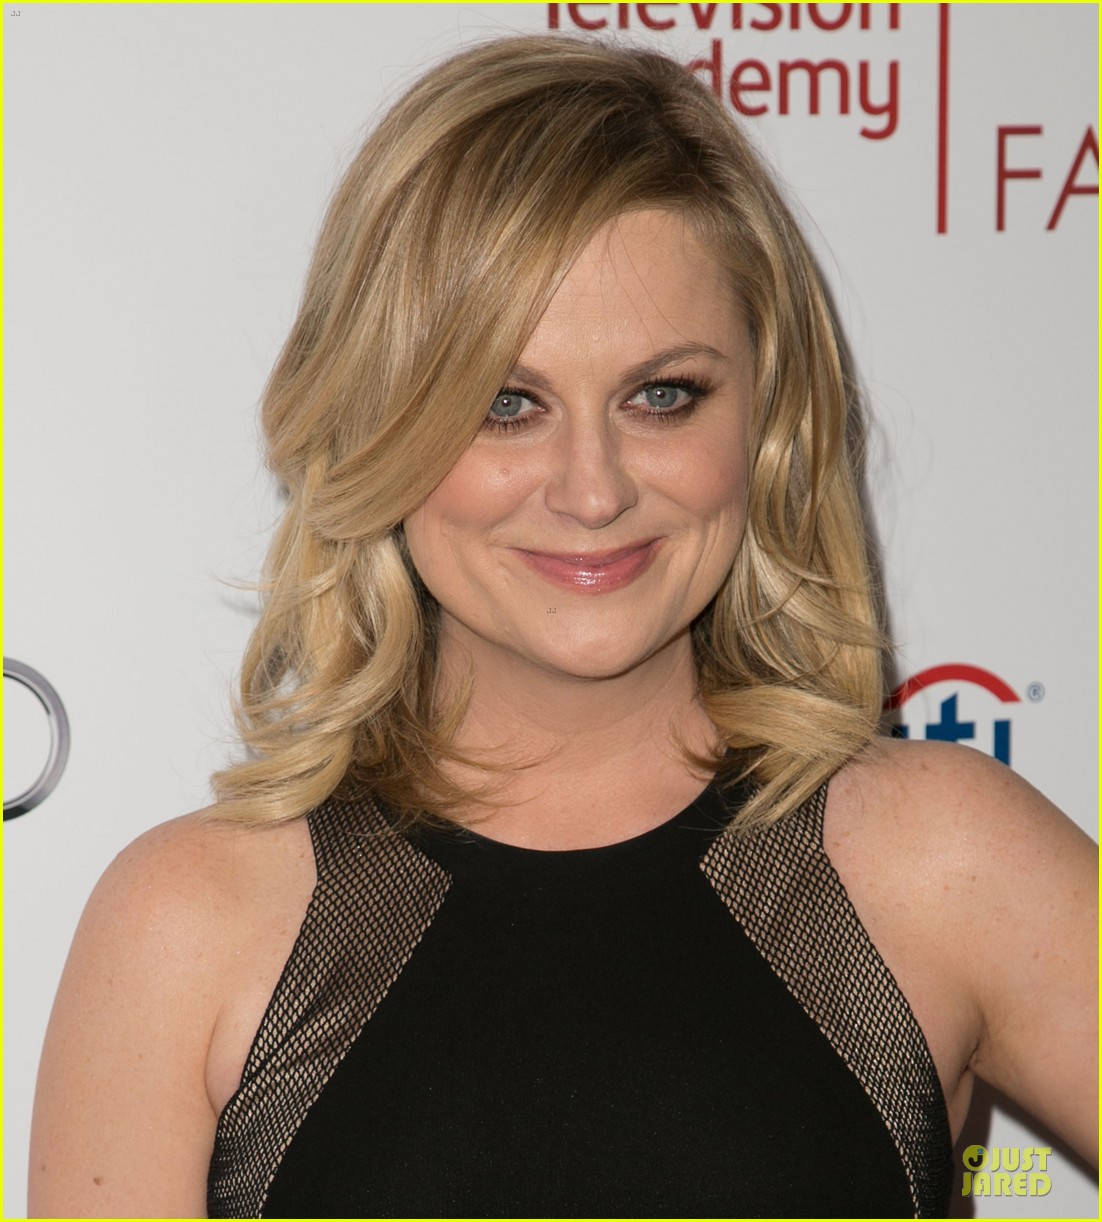 Hollywood Actress Comedian Amy Poehler